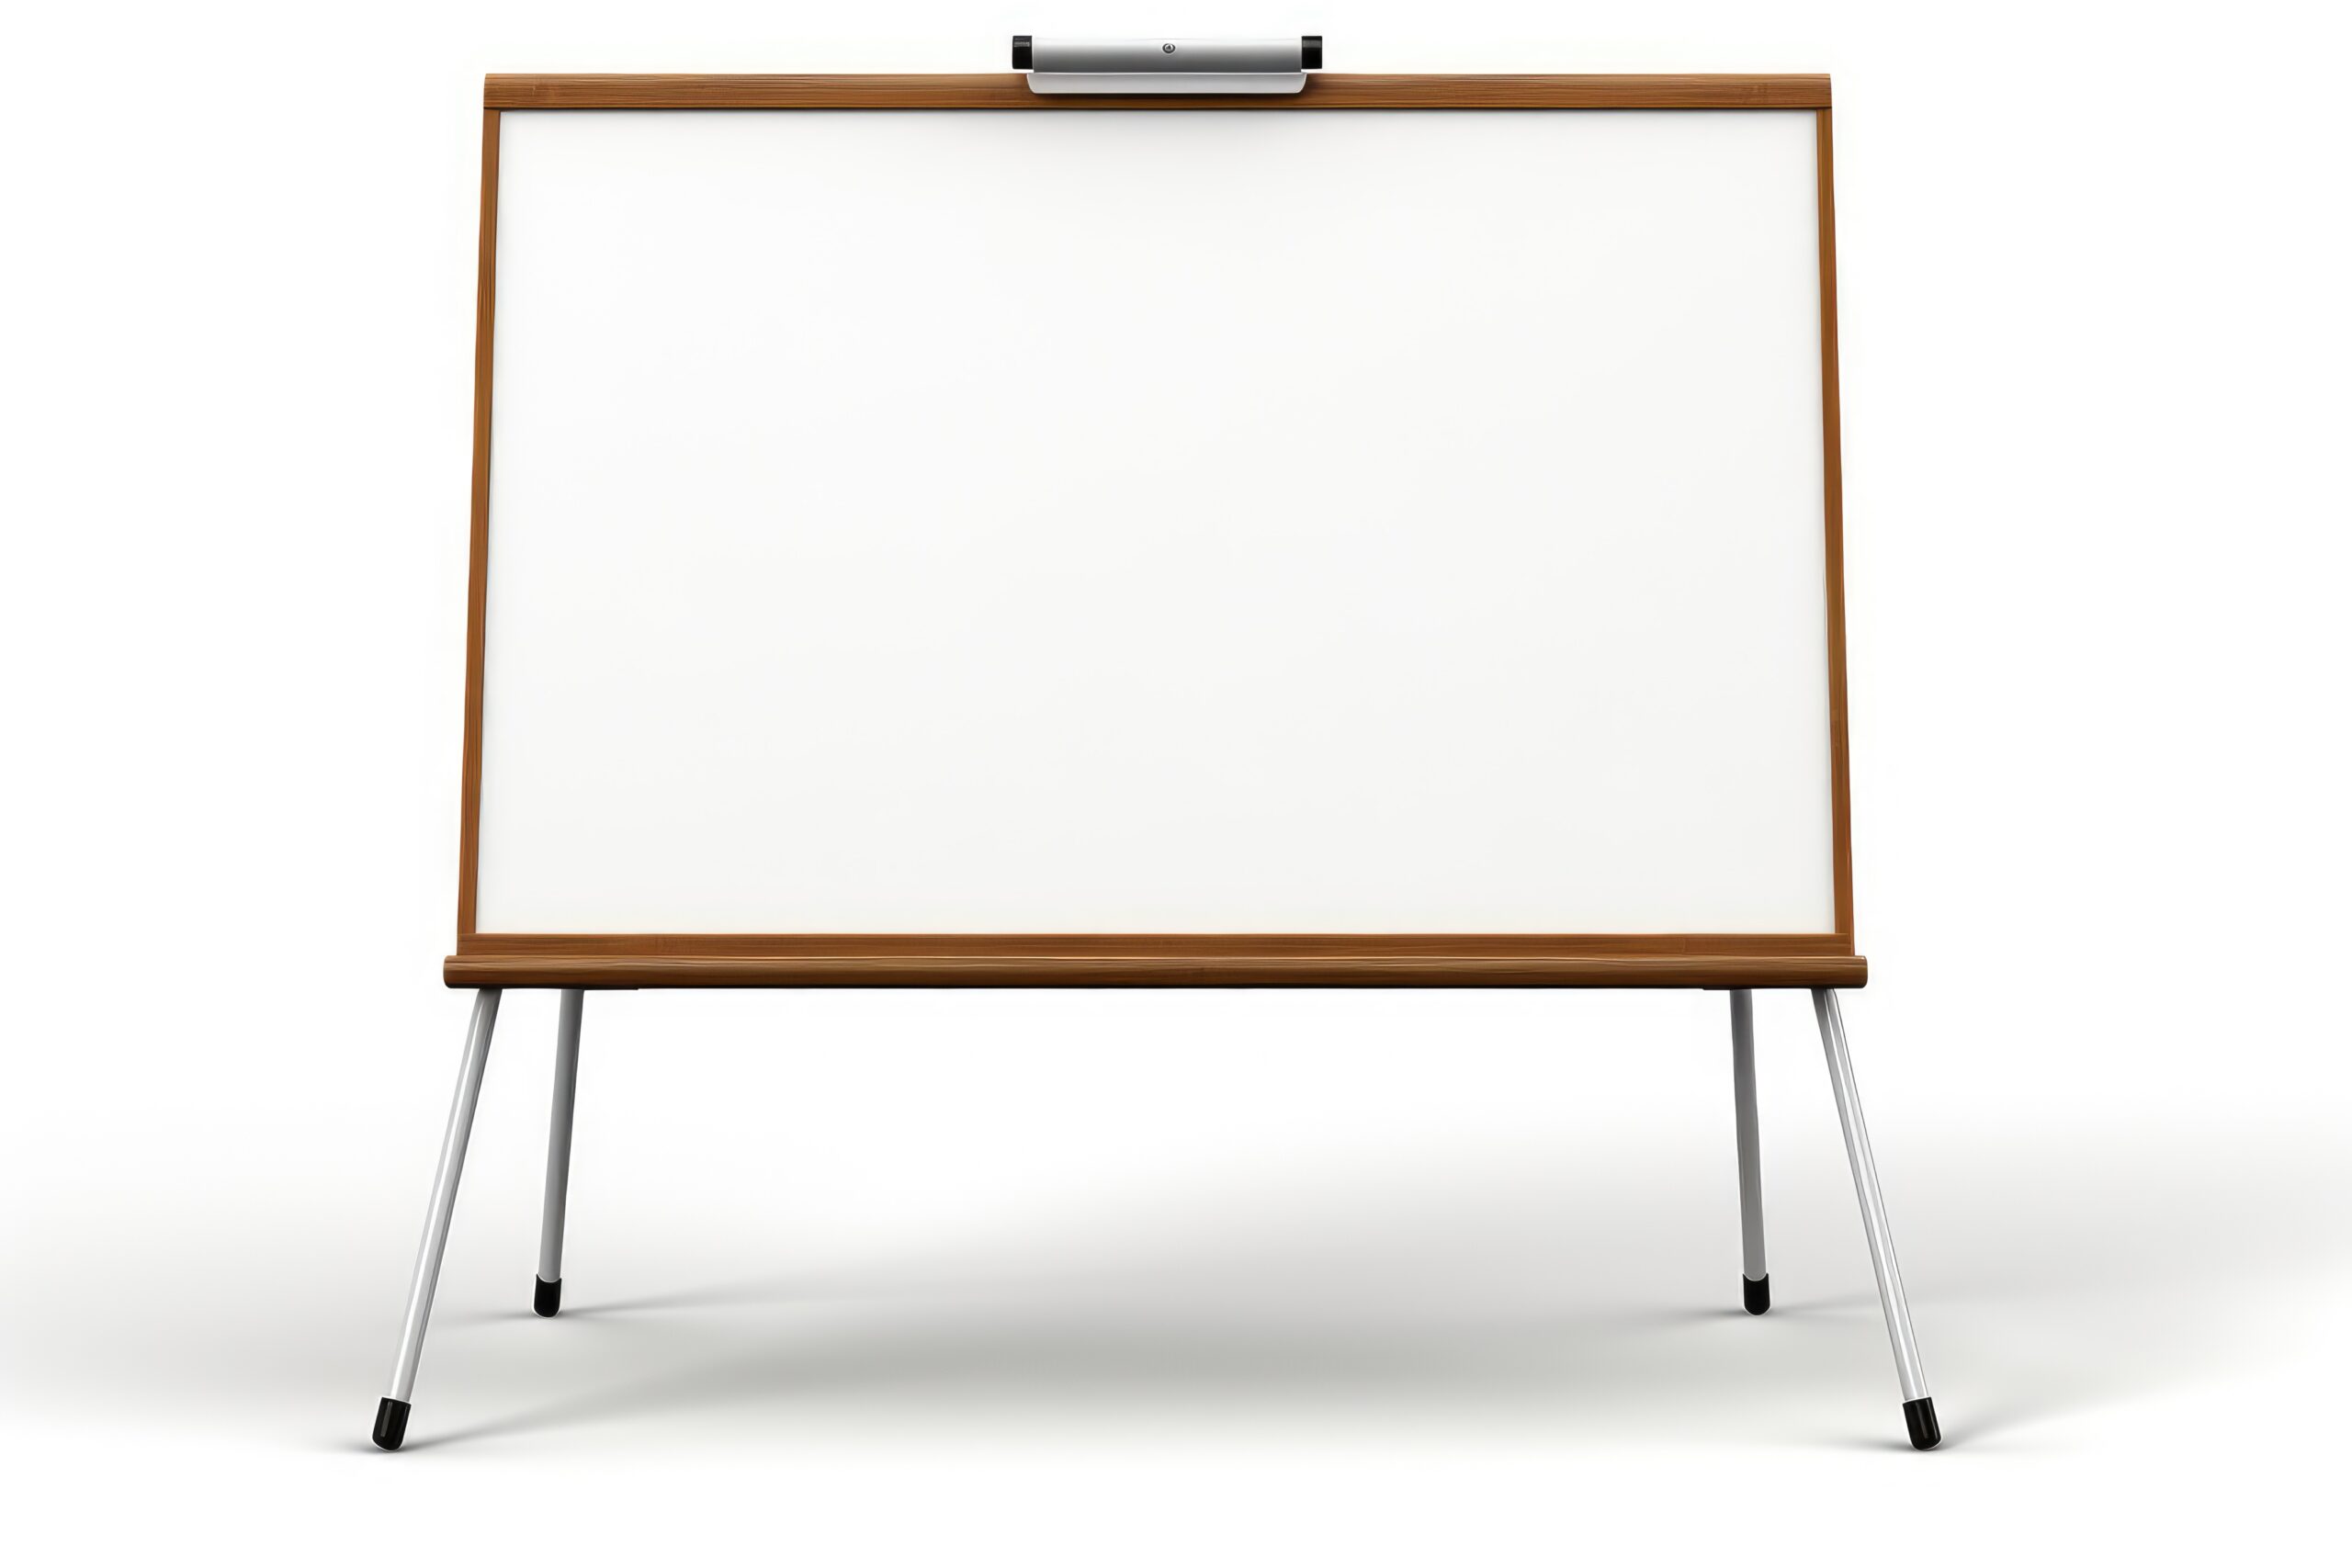 www.appr.com : How Much Does A Smart Board Cost?